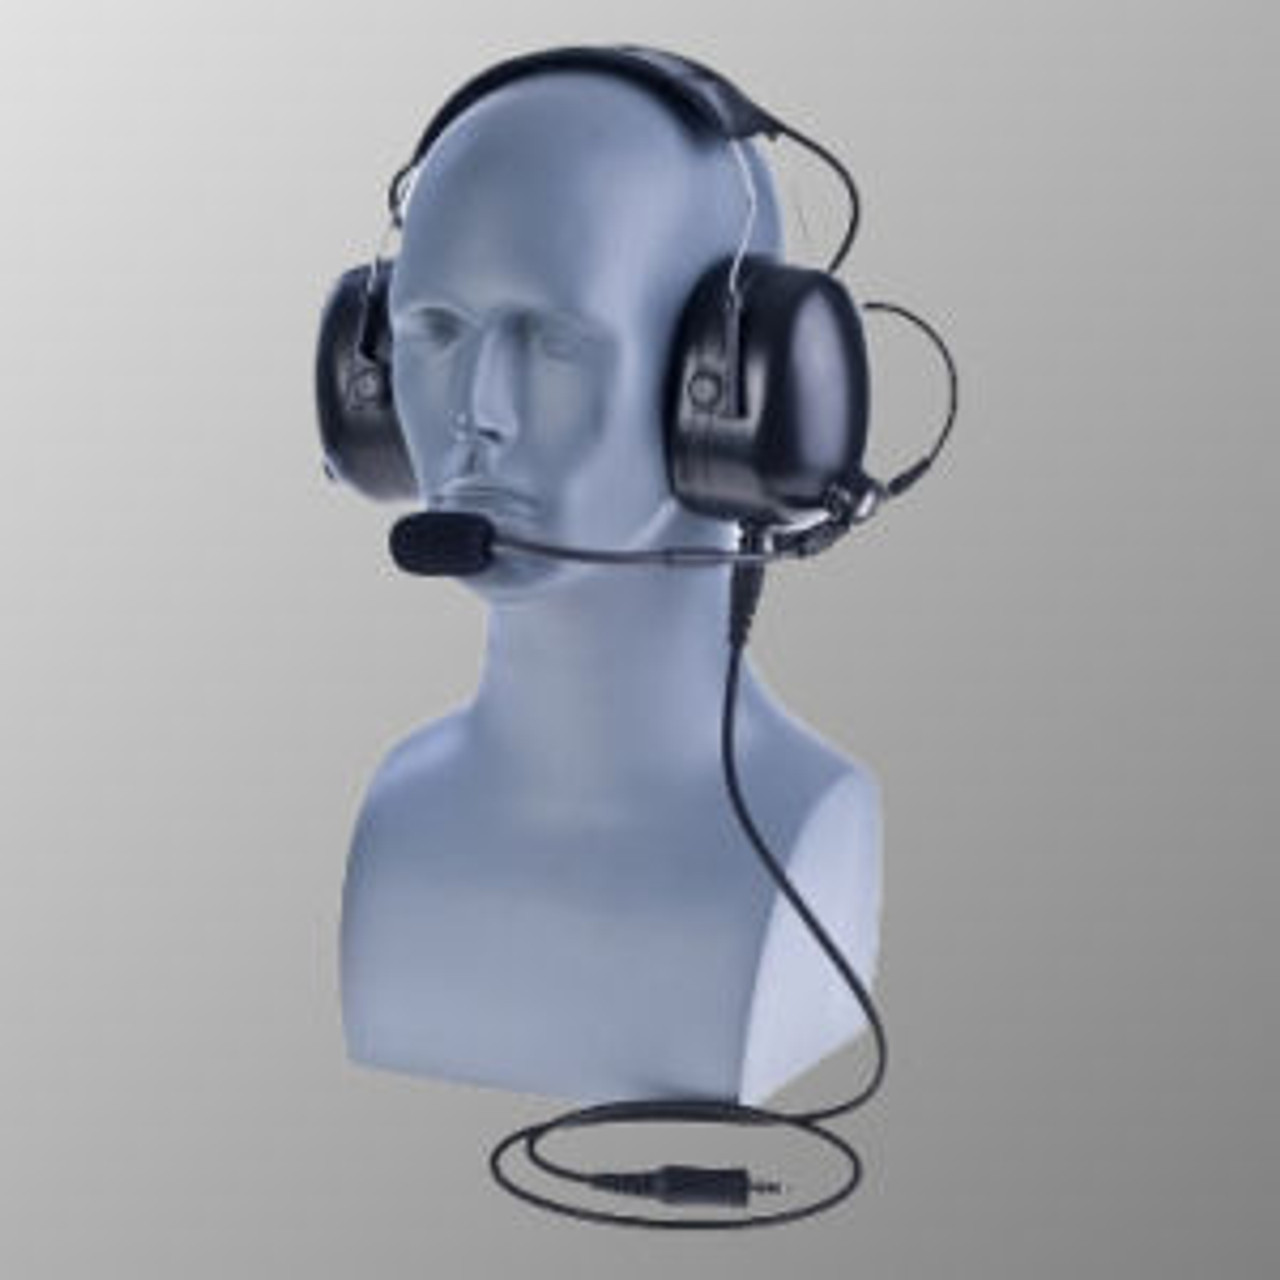 HYT / Hytera PD982 Over The Head Double Muff Headset